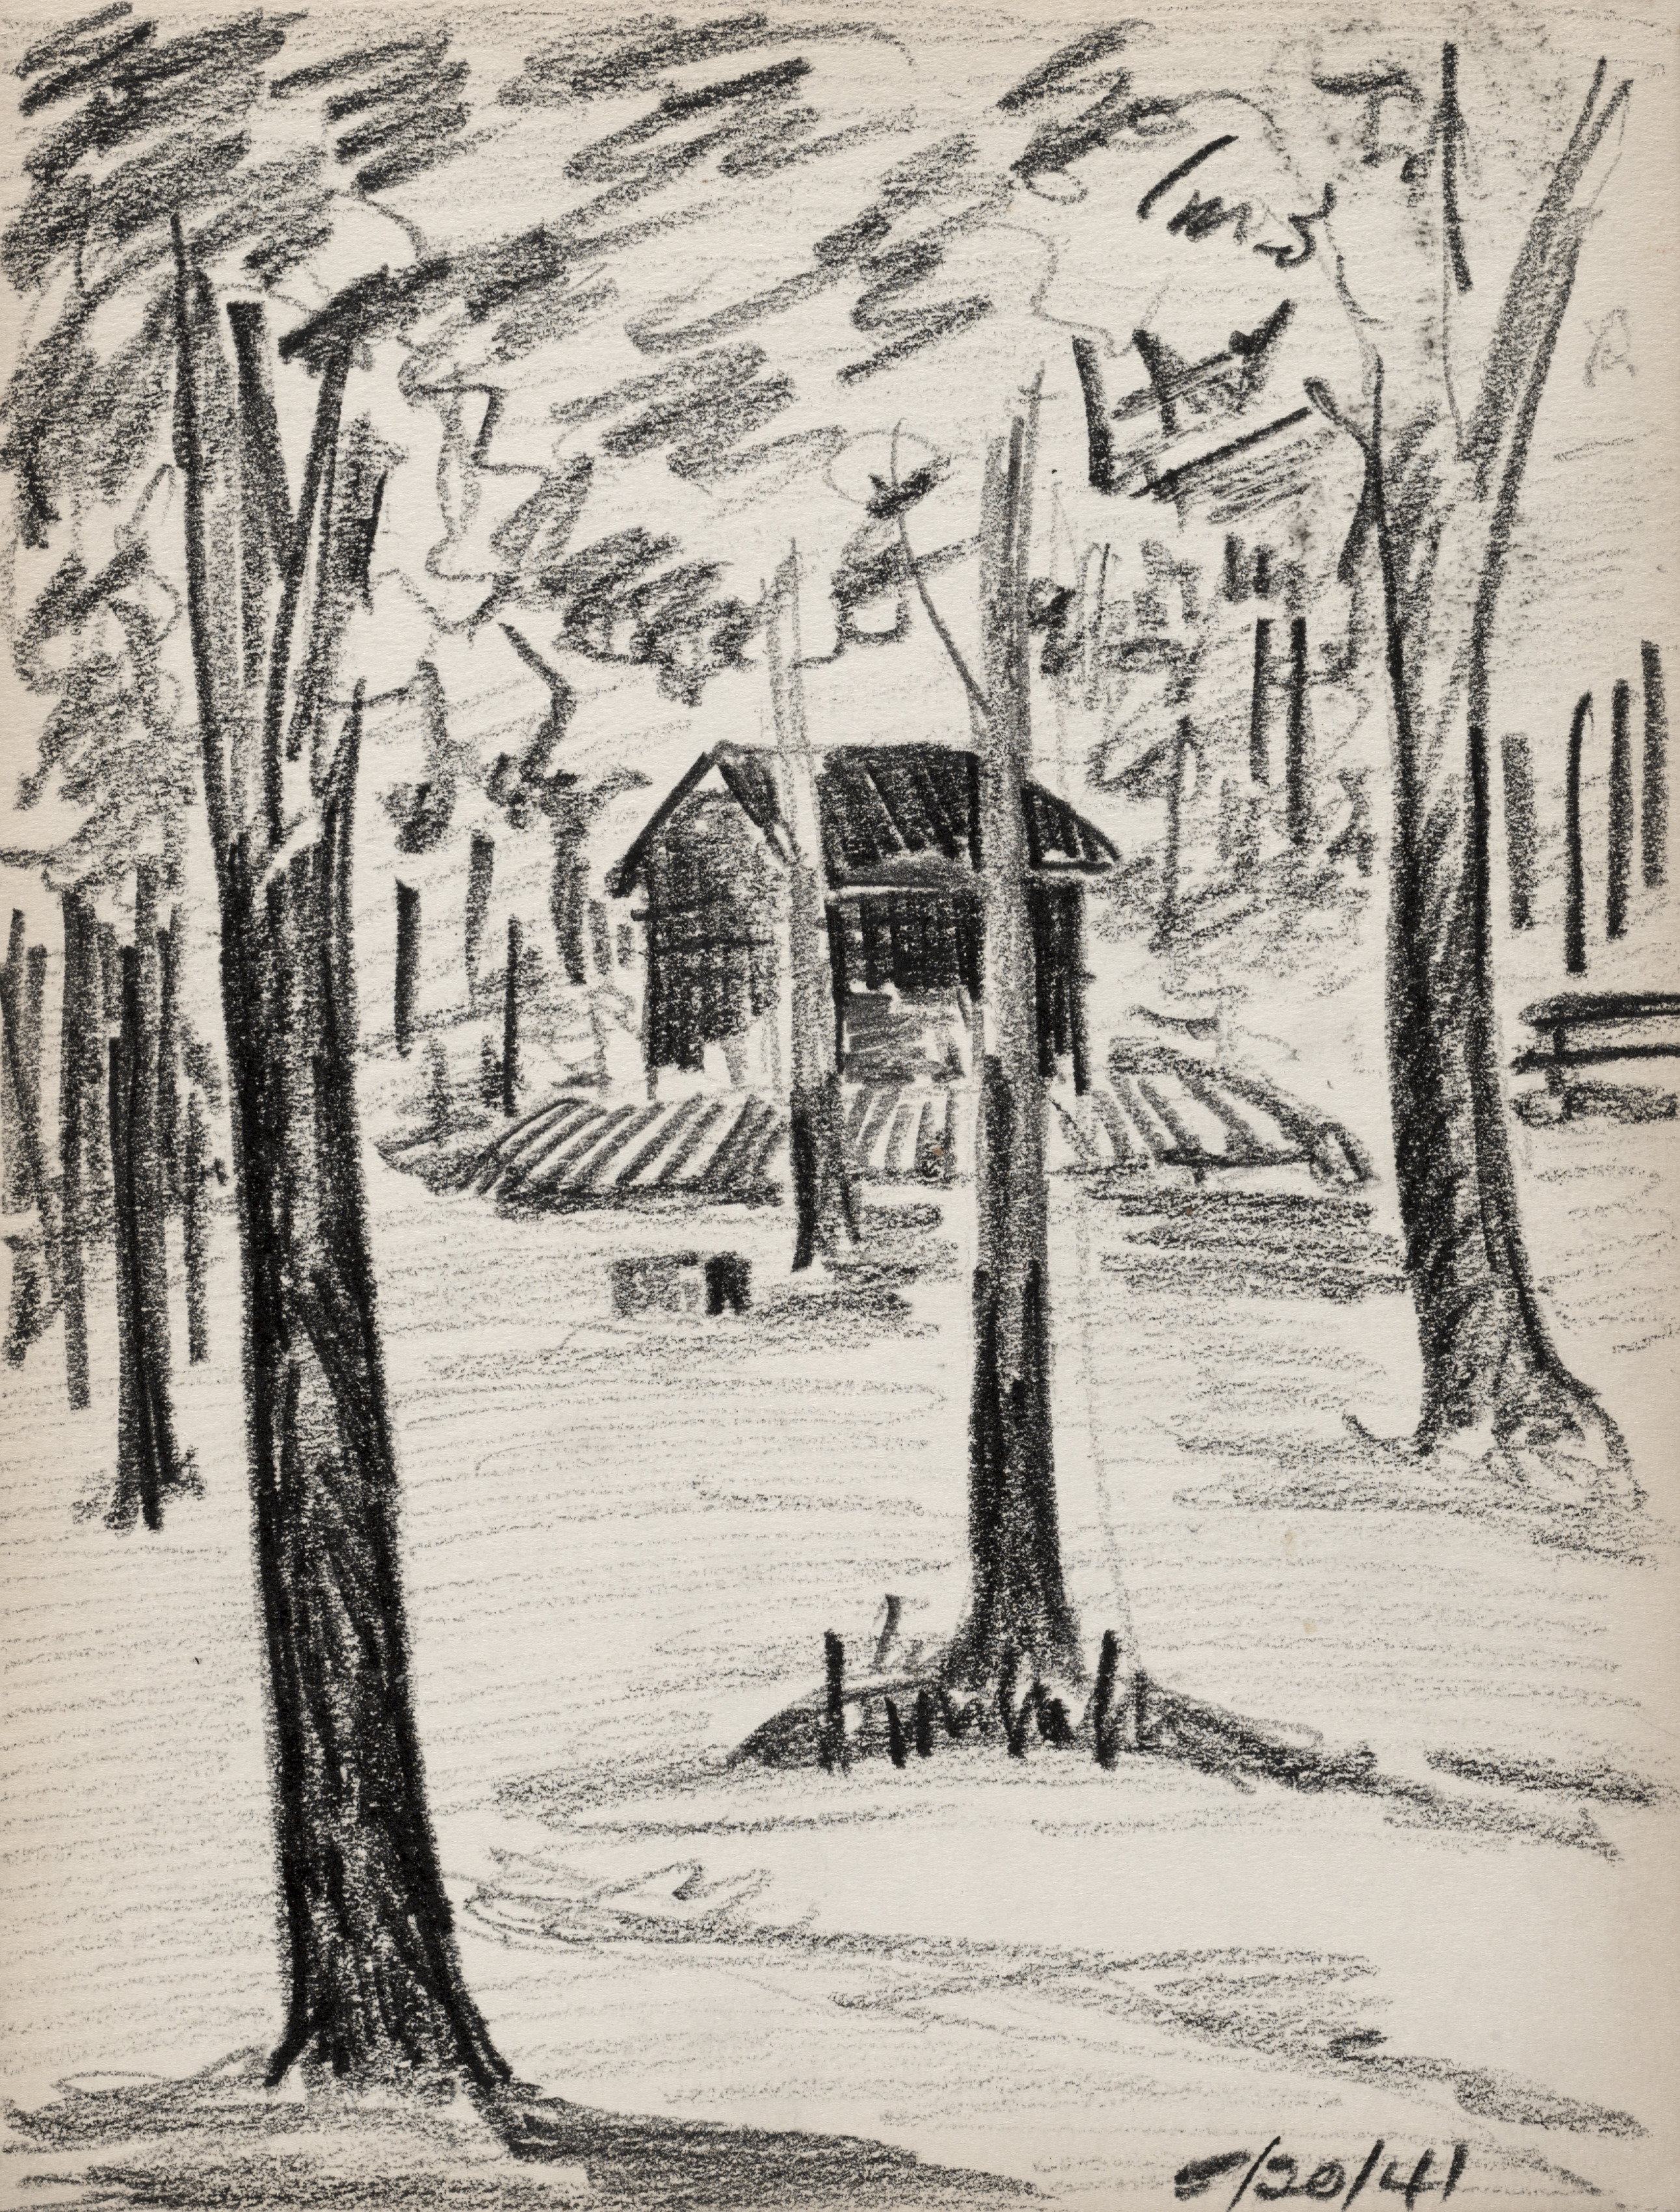 Sketchbook No. 3, page 33: House and Trees